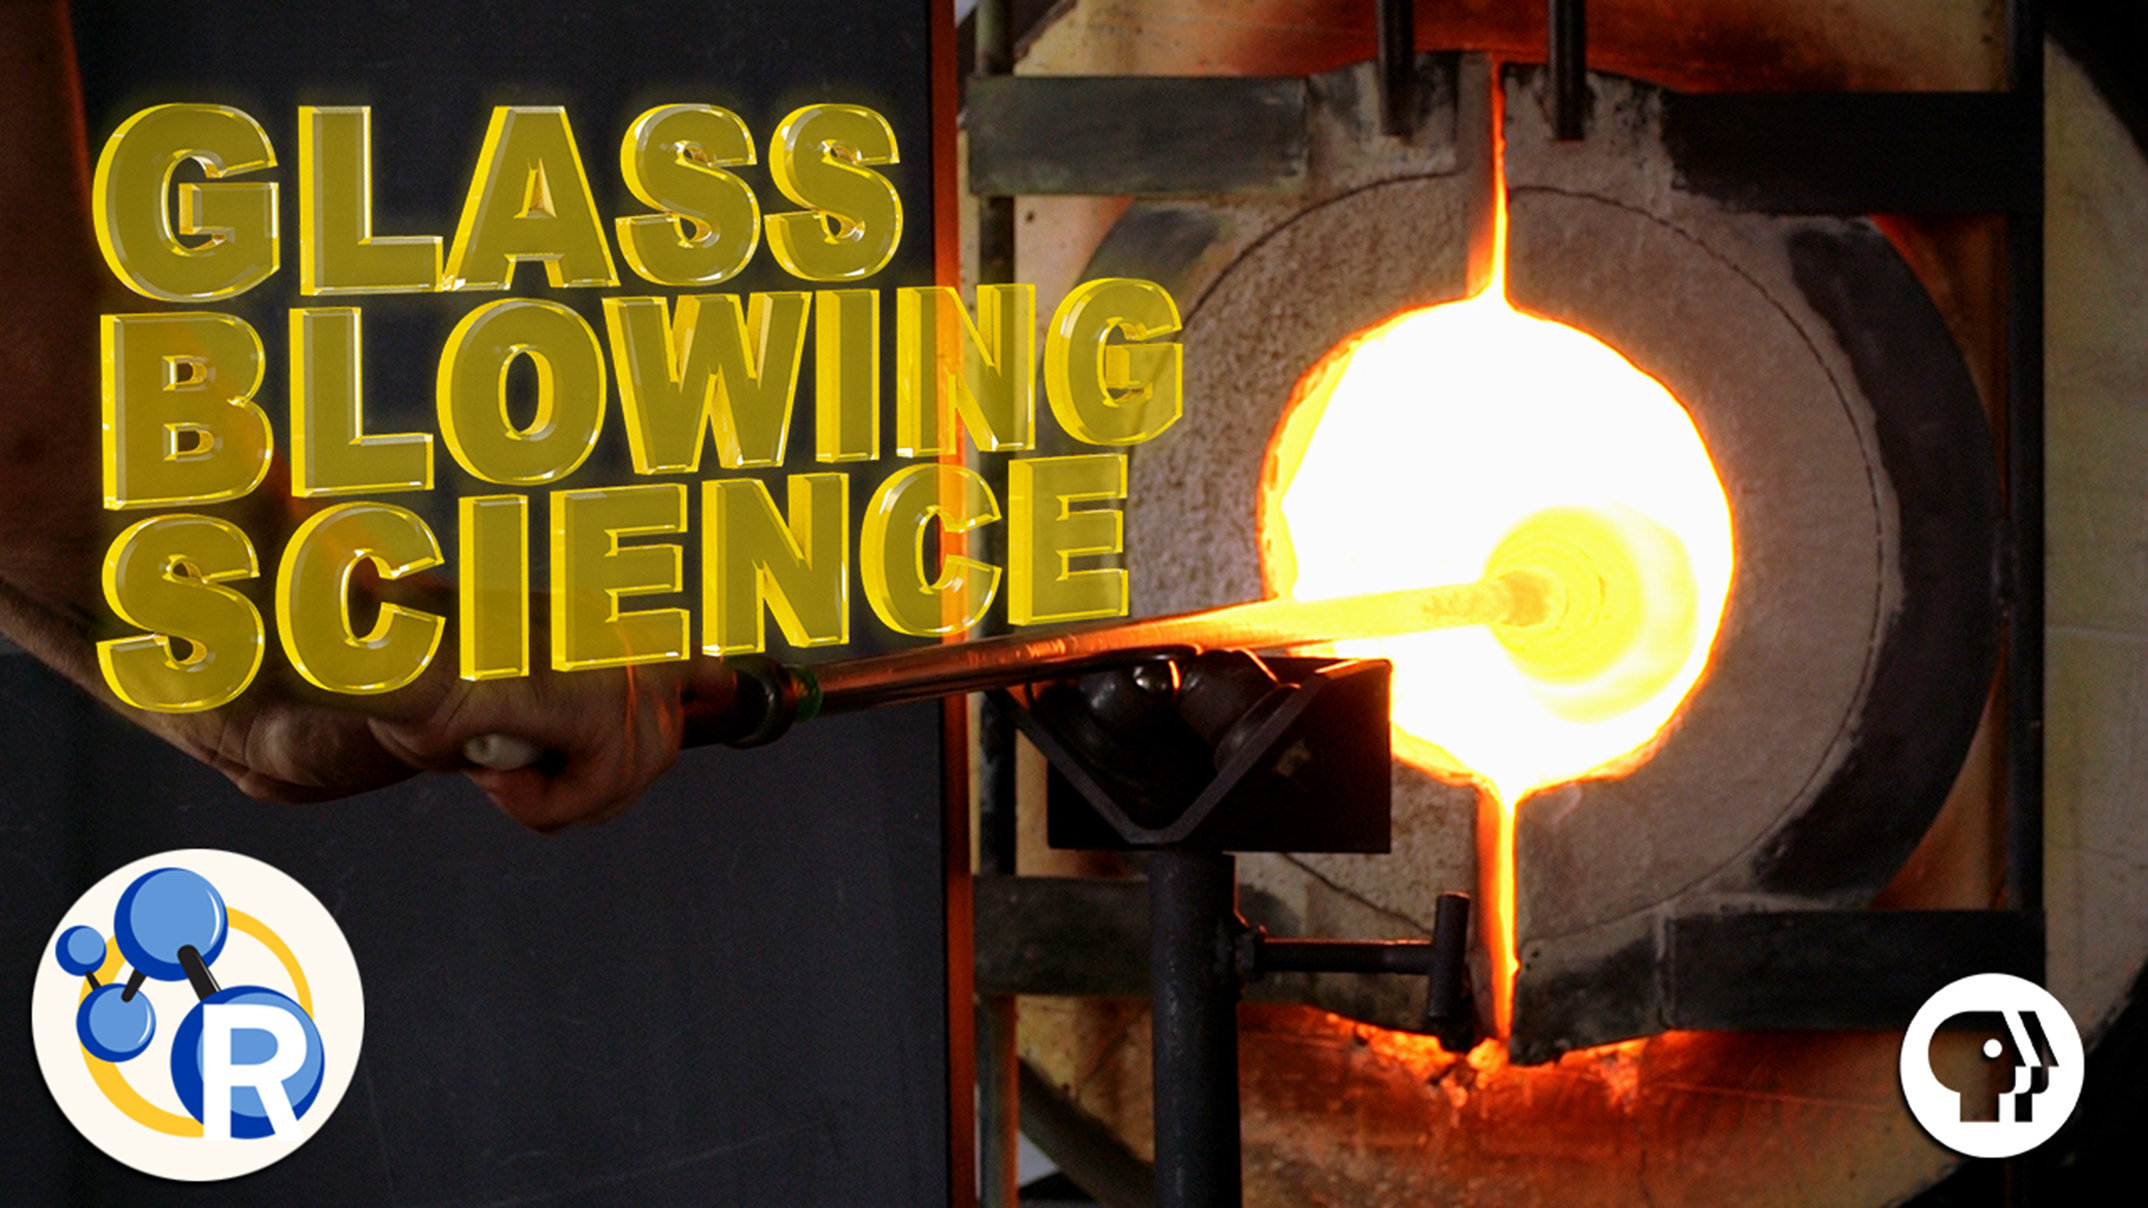 Video The Art And Science Of Glassblowing